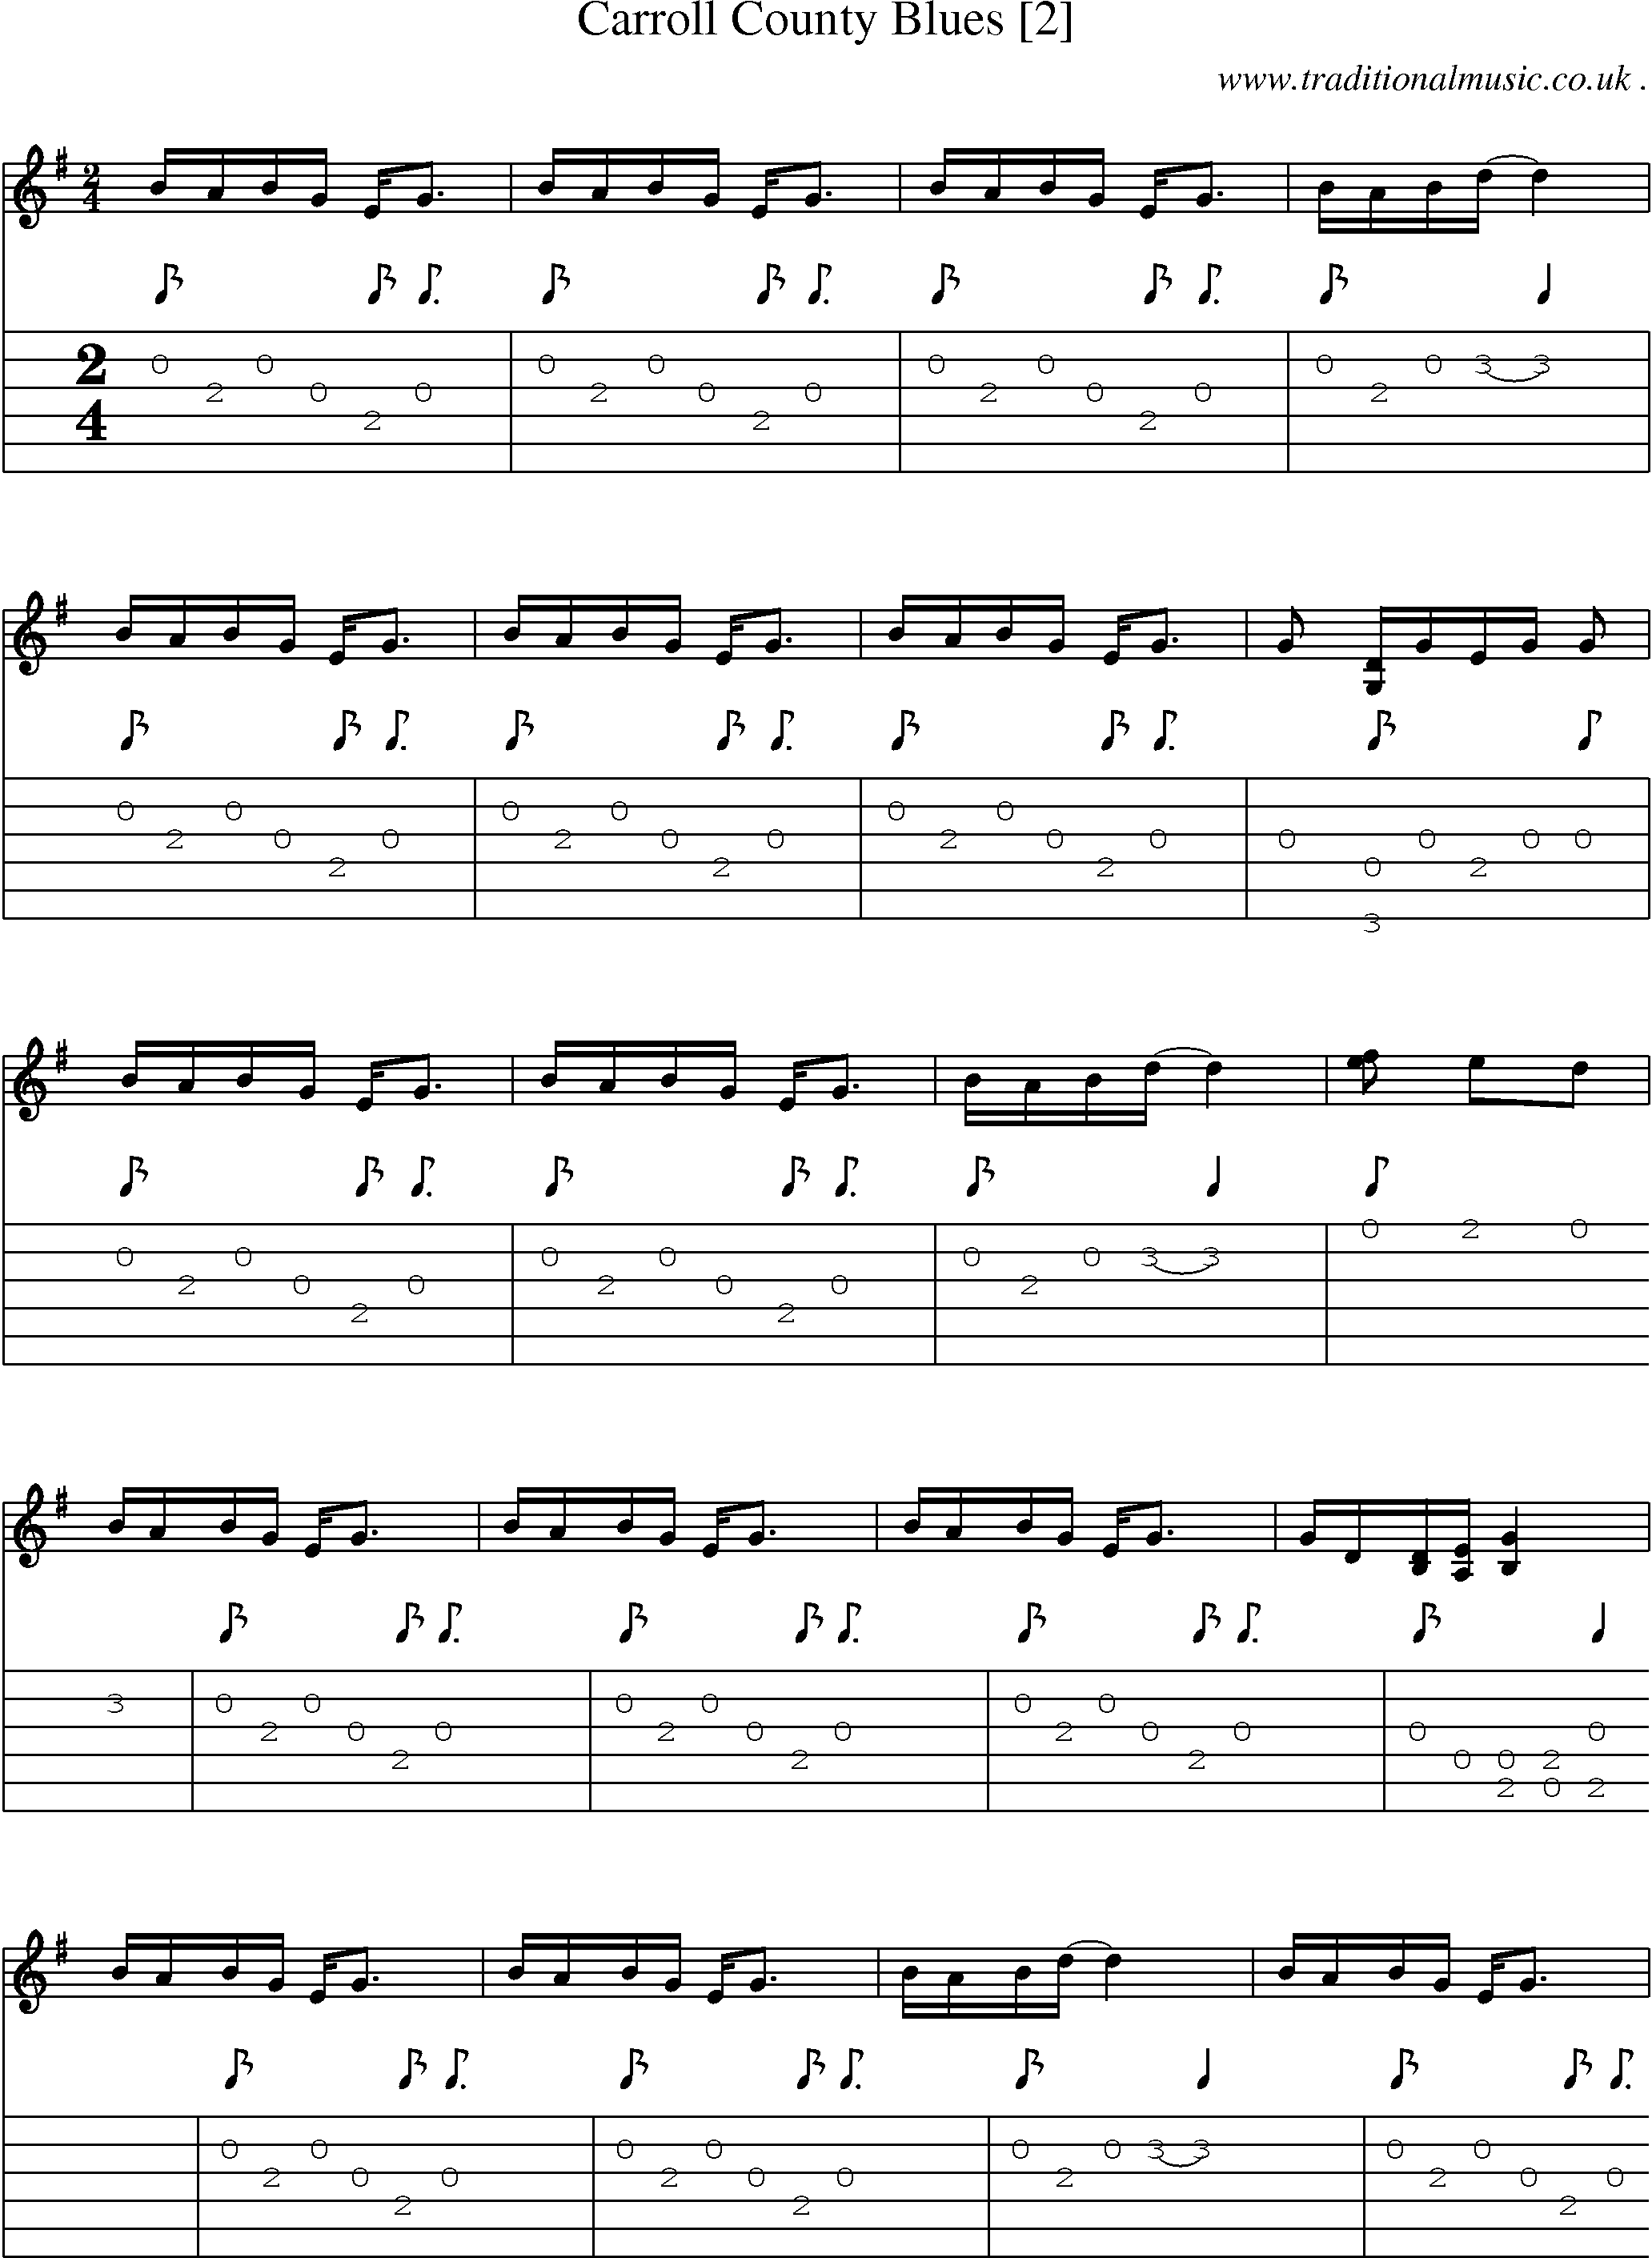 Music Score and Guitar Tabs for Carroll County Blues [2]